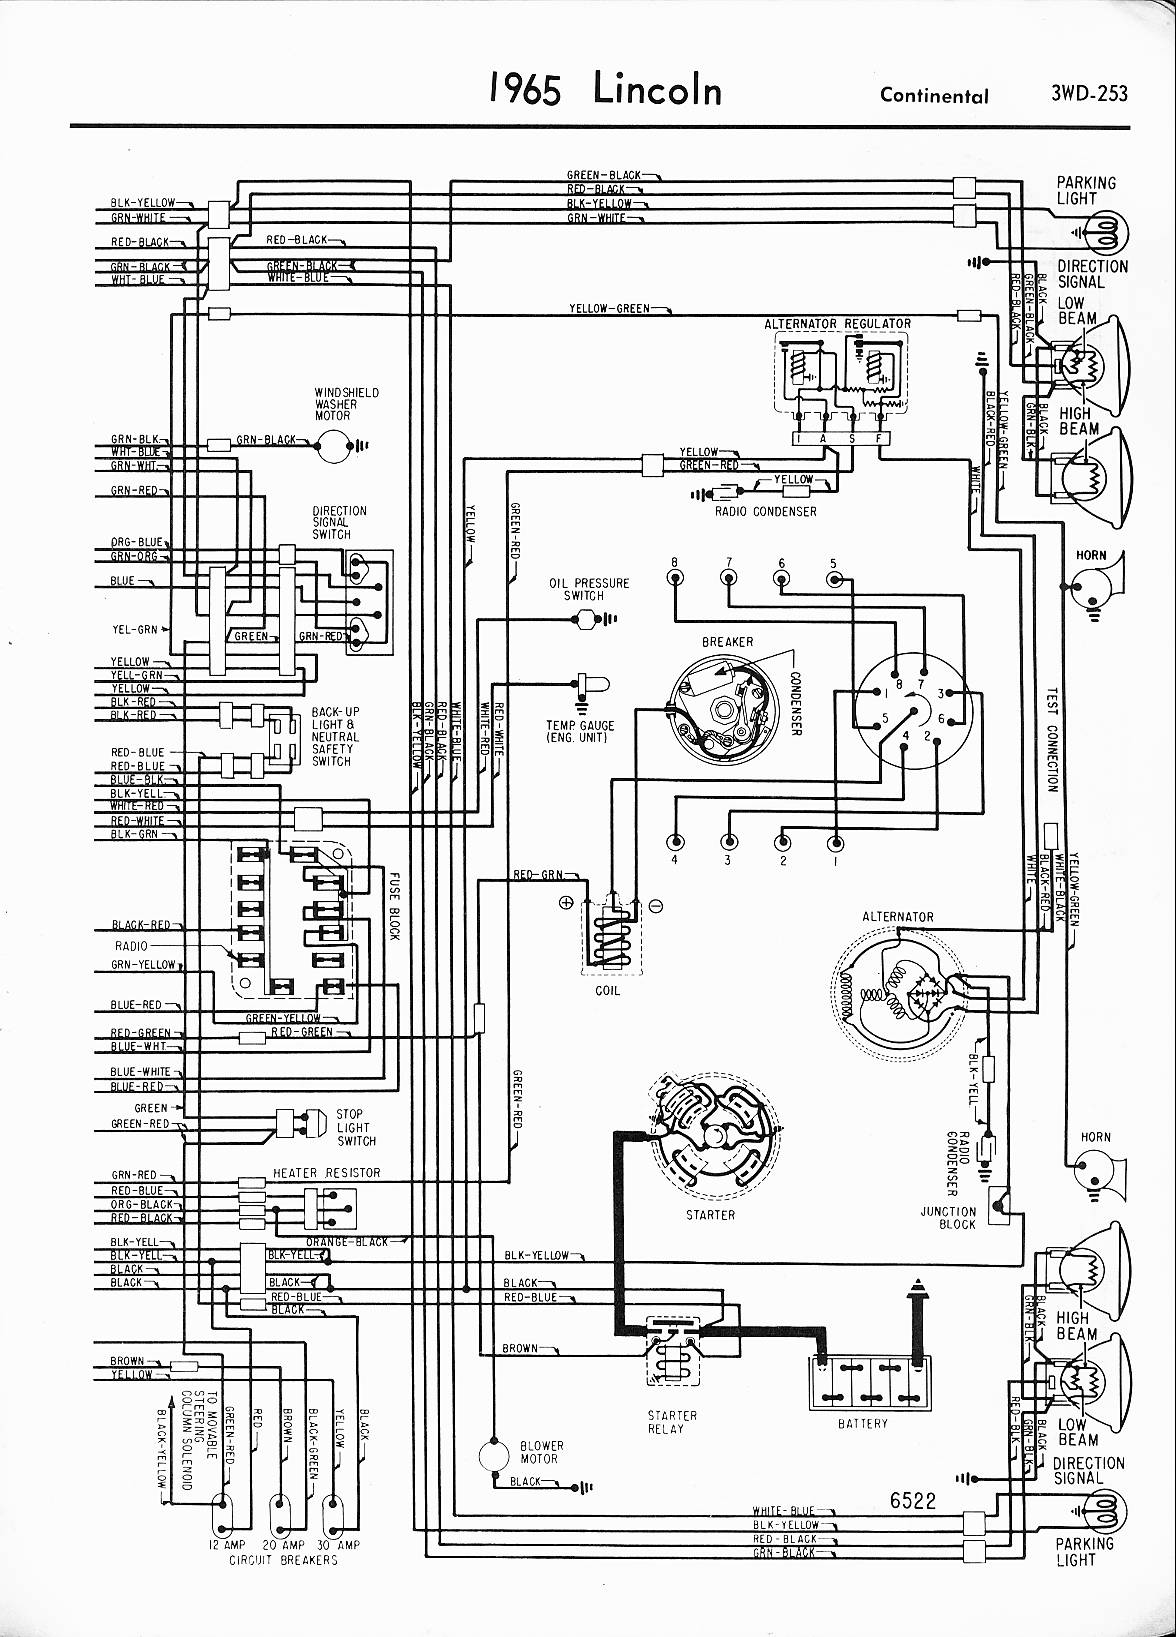 A25 Lincoln Weld Pak 100 Wiring Diagram Wiring Library